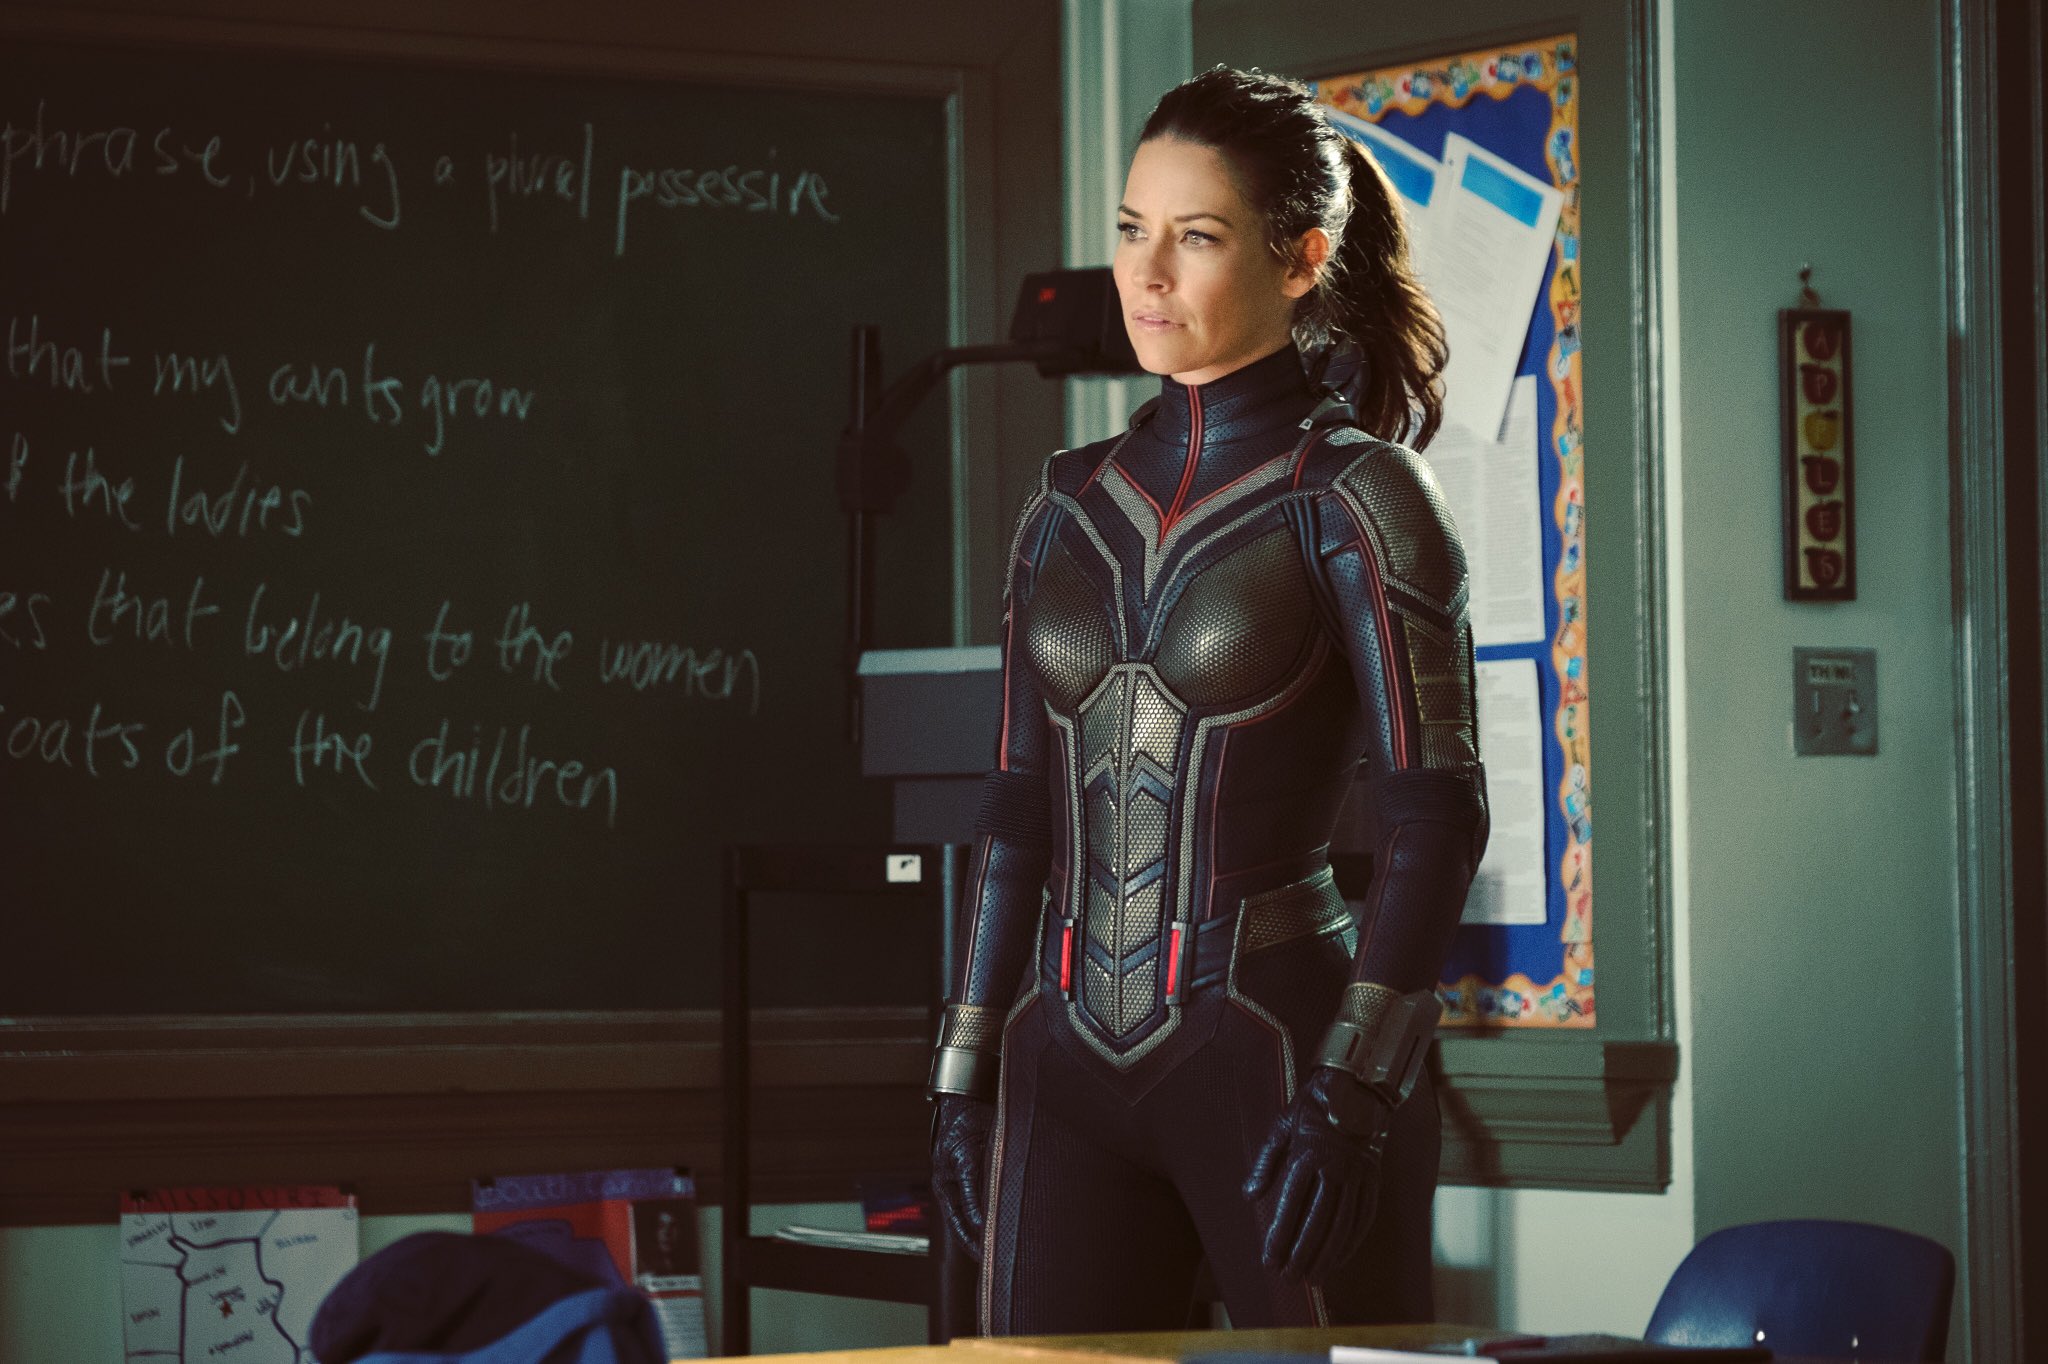 Ant-Man And The Wasp Splash Art Wallpapers